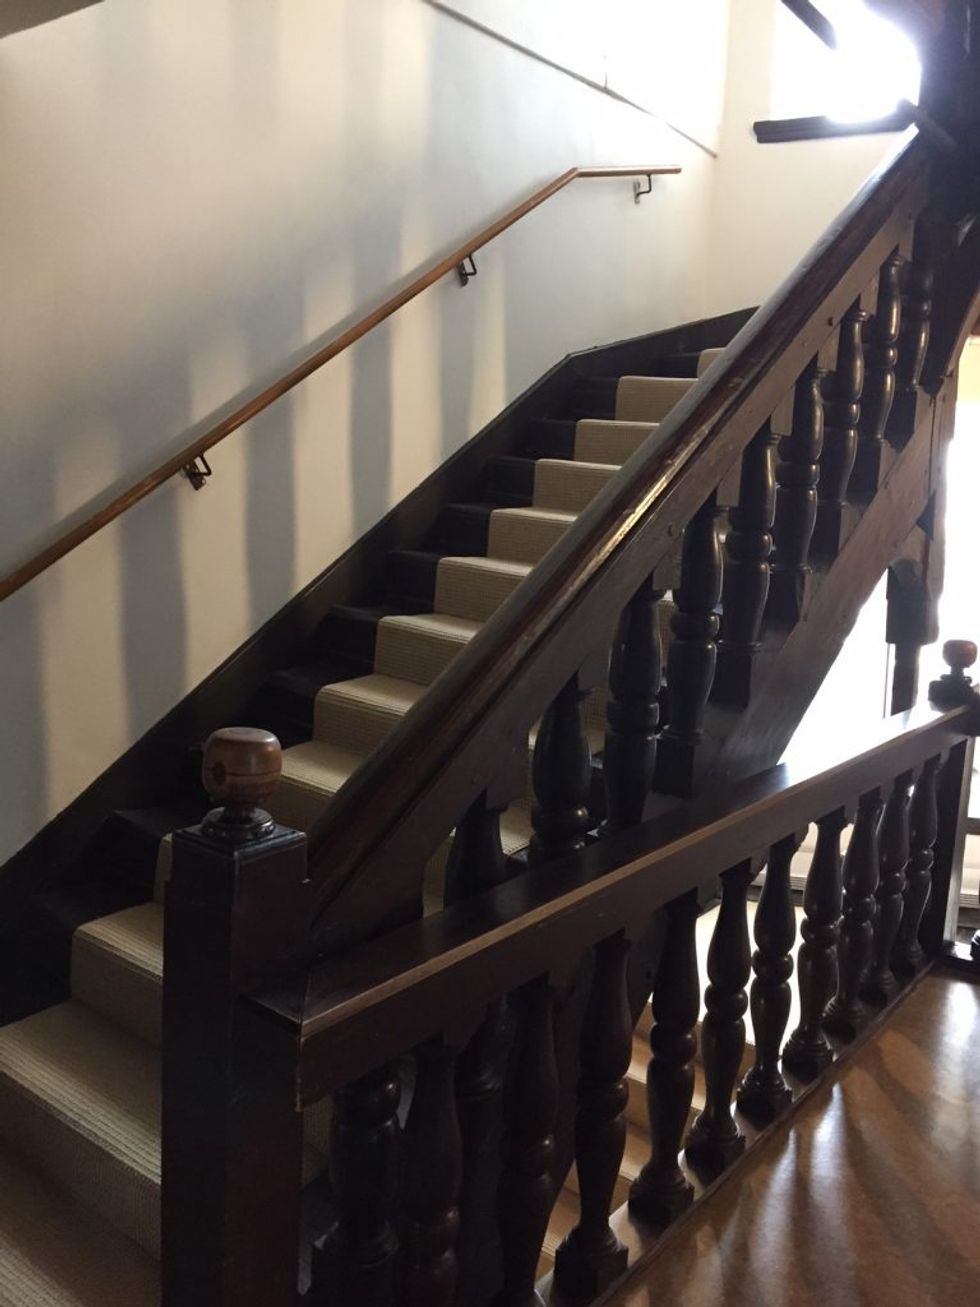 The staircase dates back the 1700s.